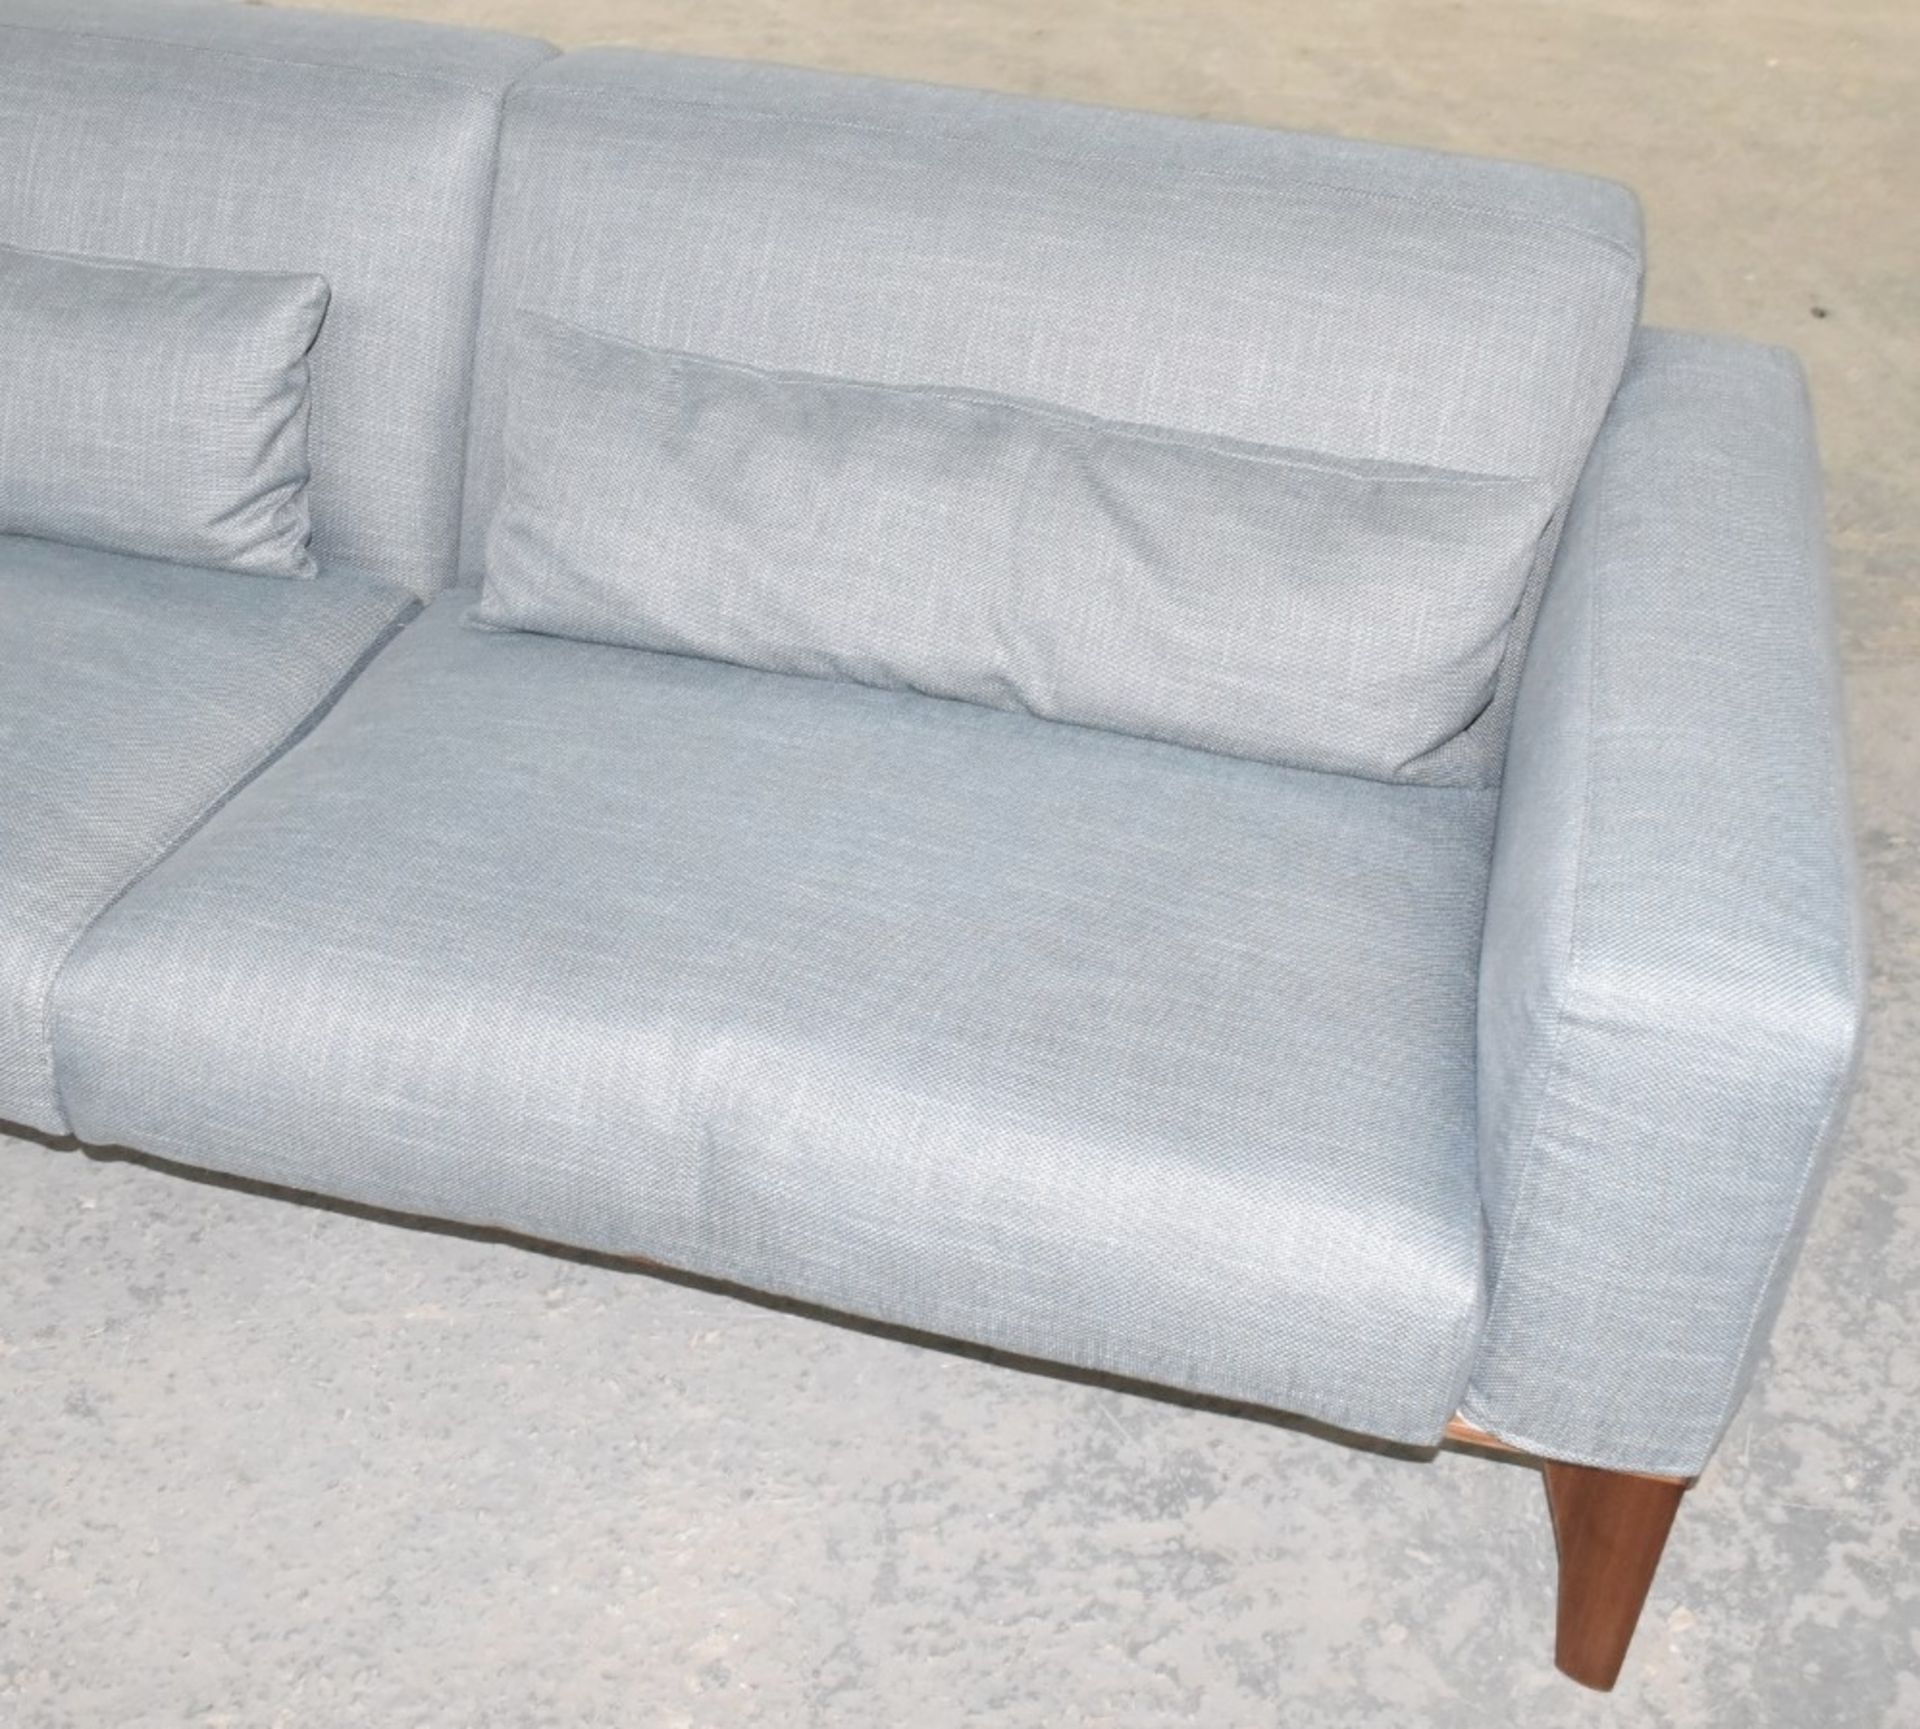 1 x PORADA 'Fellow' Designer Upholstered 2.2-Metre Sofa with a Canaletto Walnut Frame - RRP £7,450 - Image 4 of 12